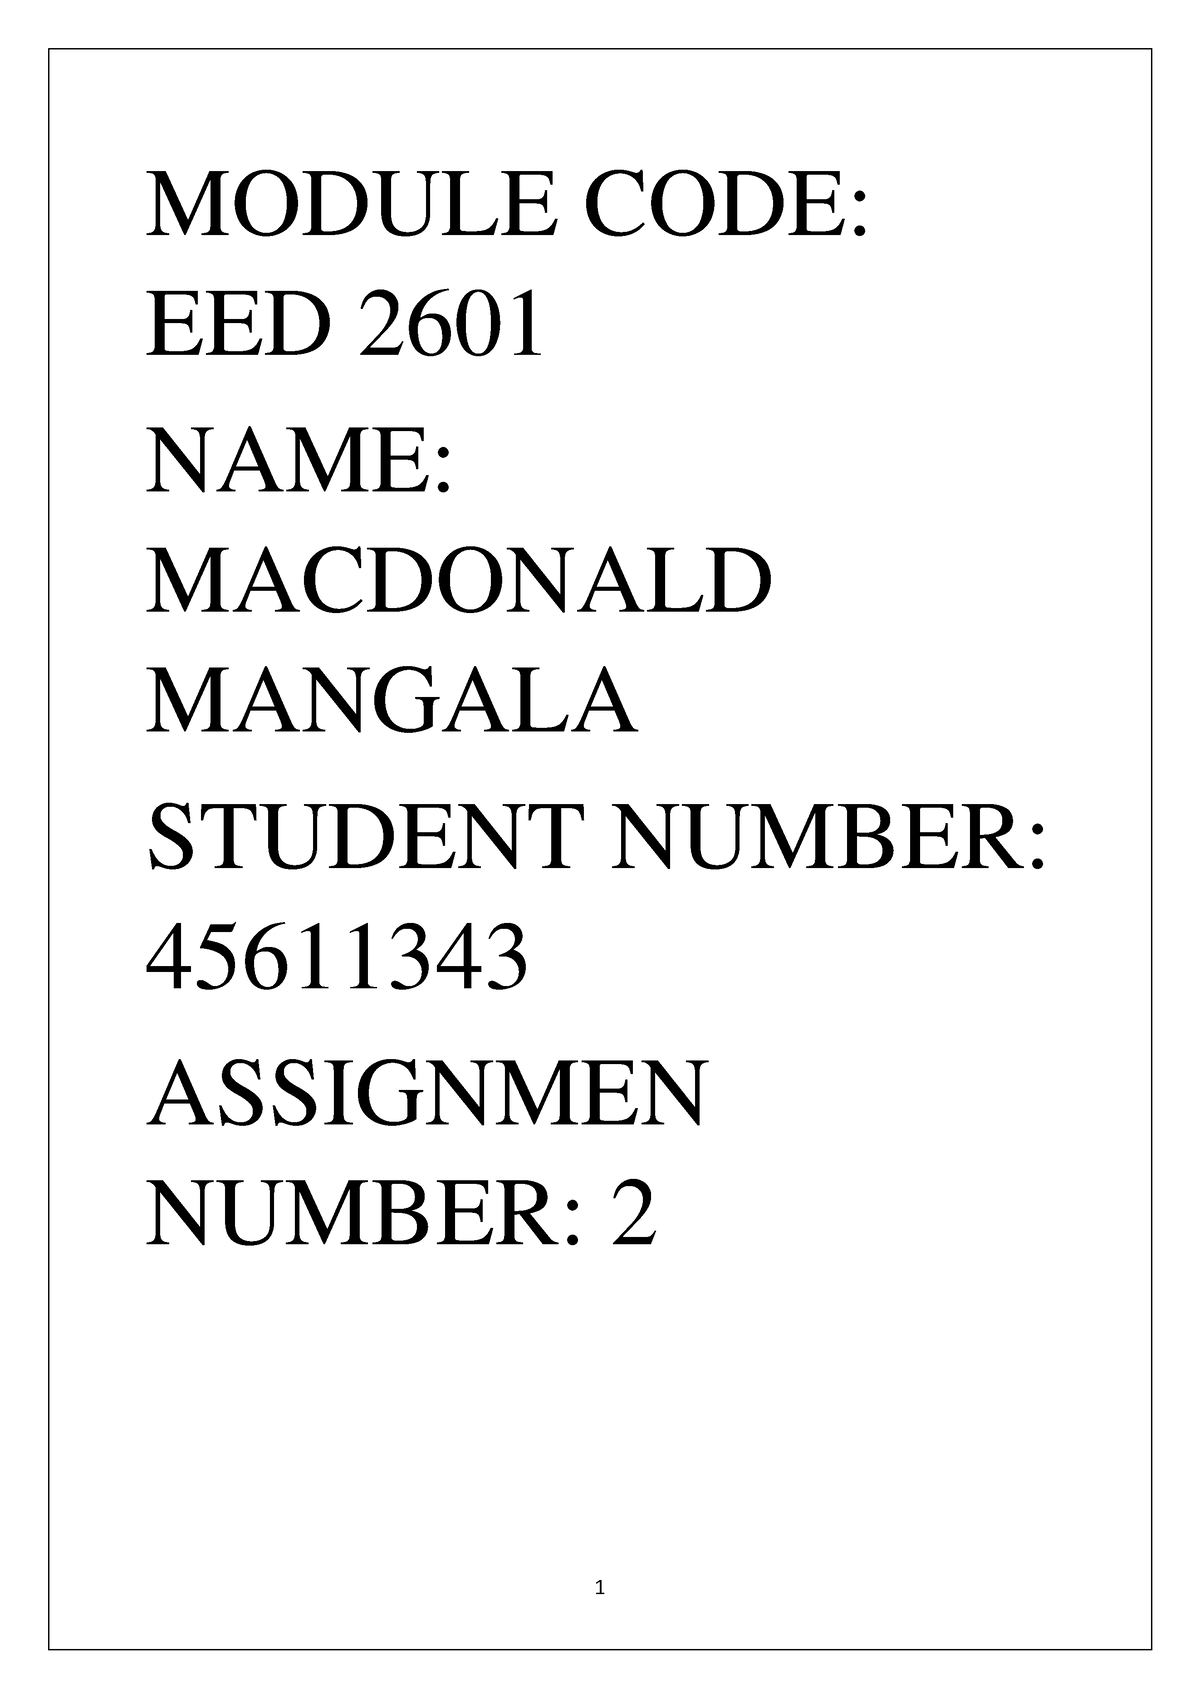 eed2601 assignment 5 answers 2023